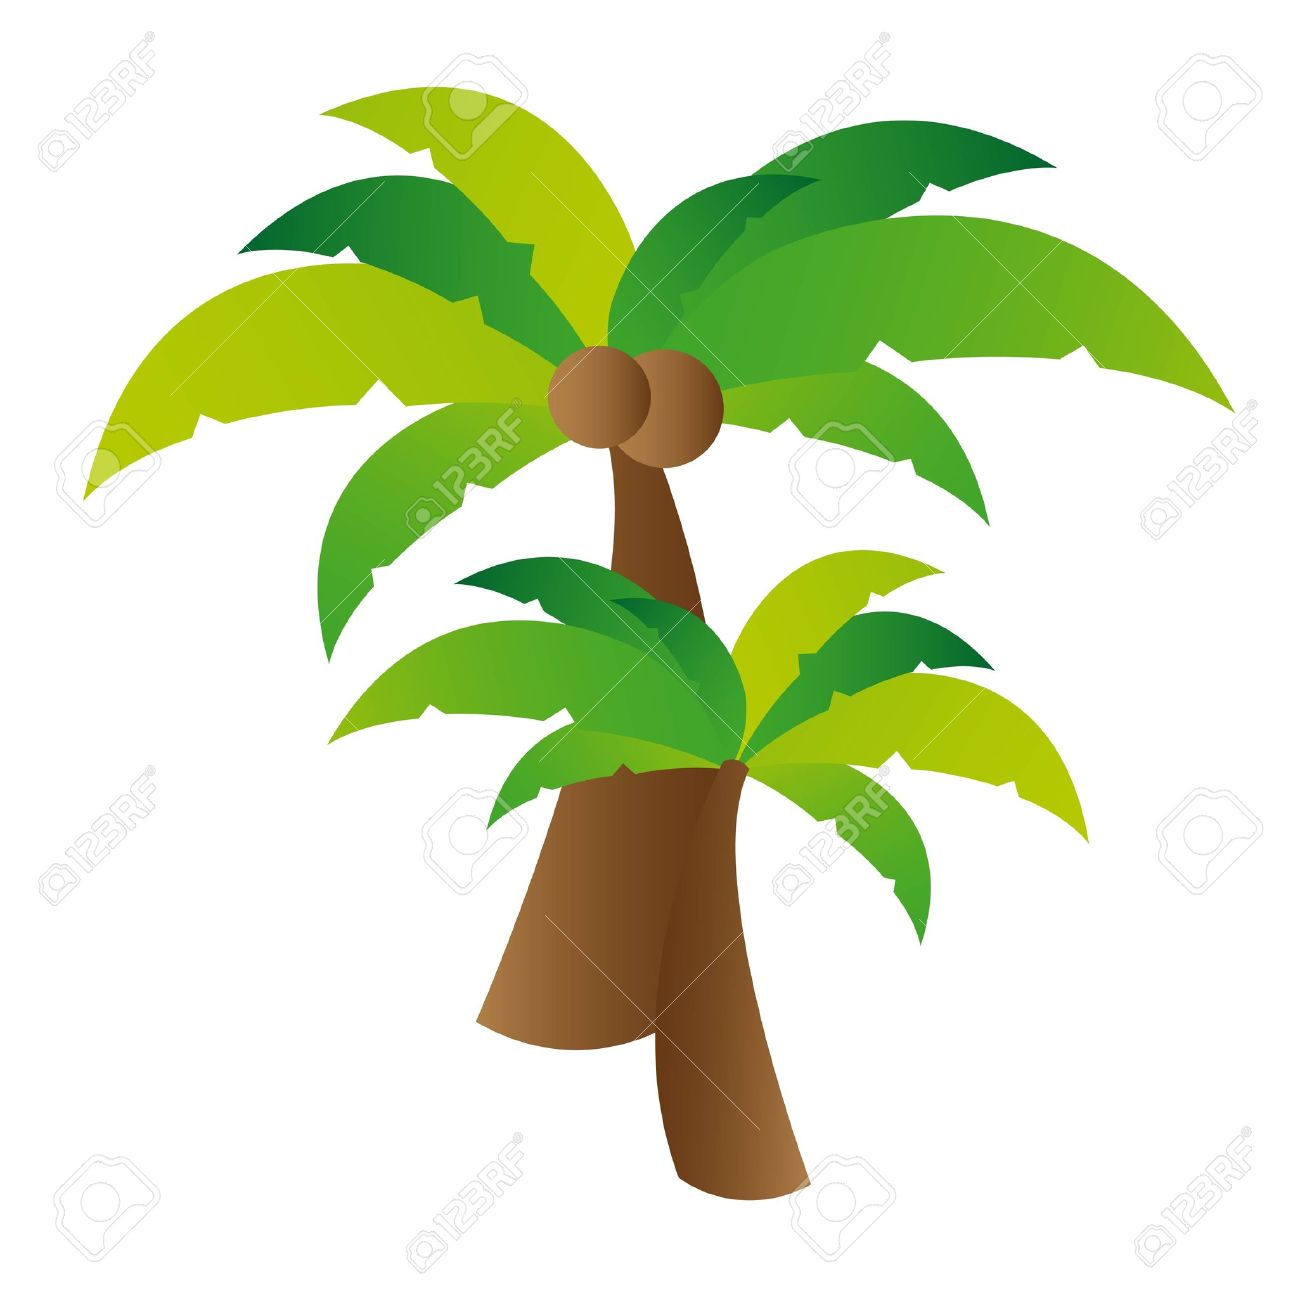 Palm tree coconut clipart.